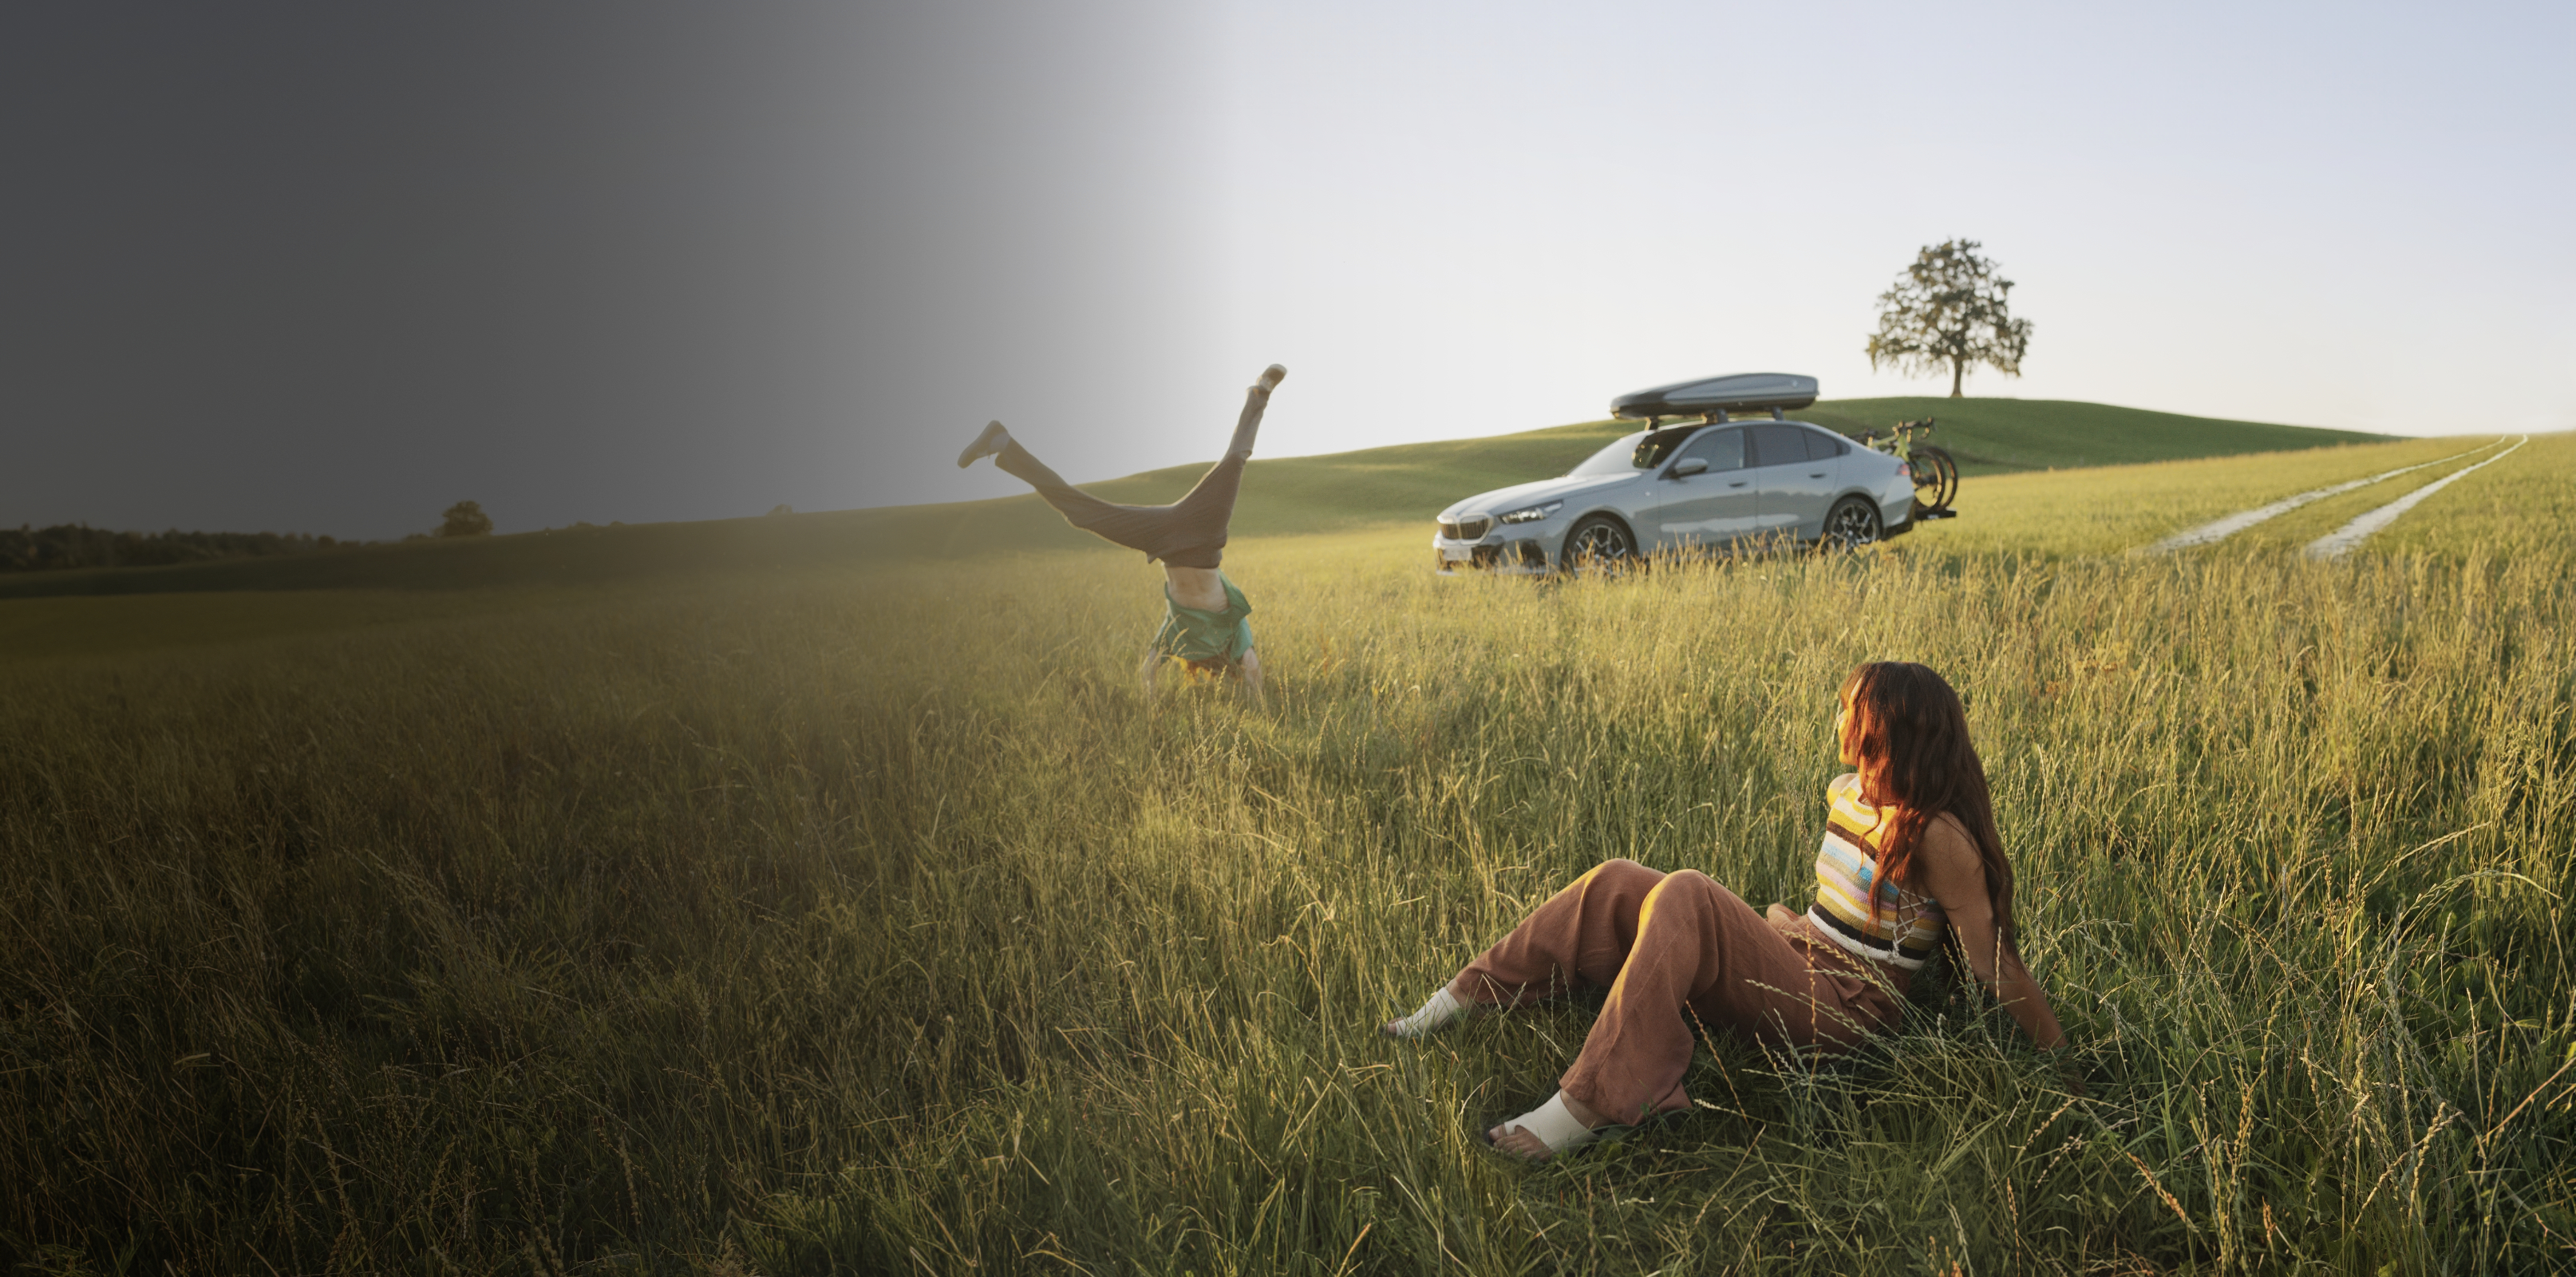 A BMW Sedan with a roof rack is parked in a field with a young woman admiring it over her shoulder in the foreground.